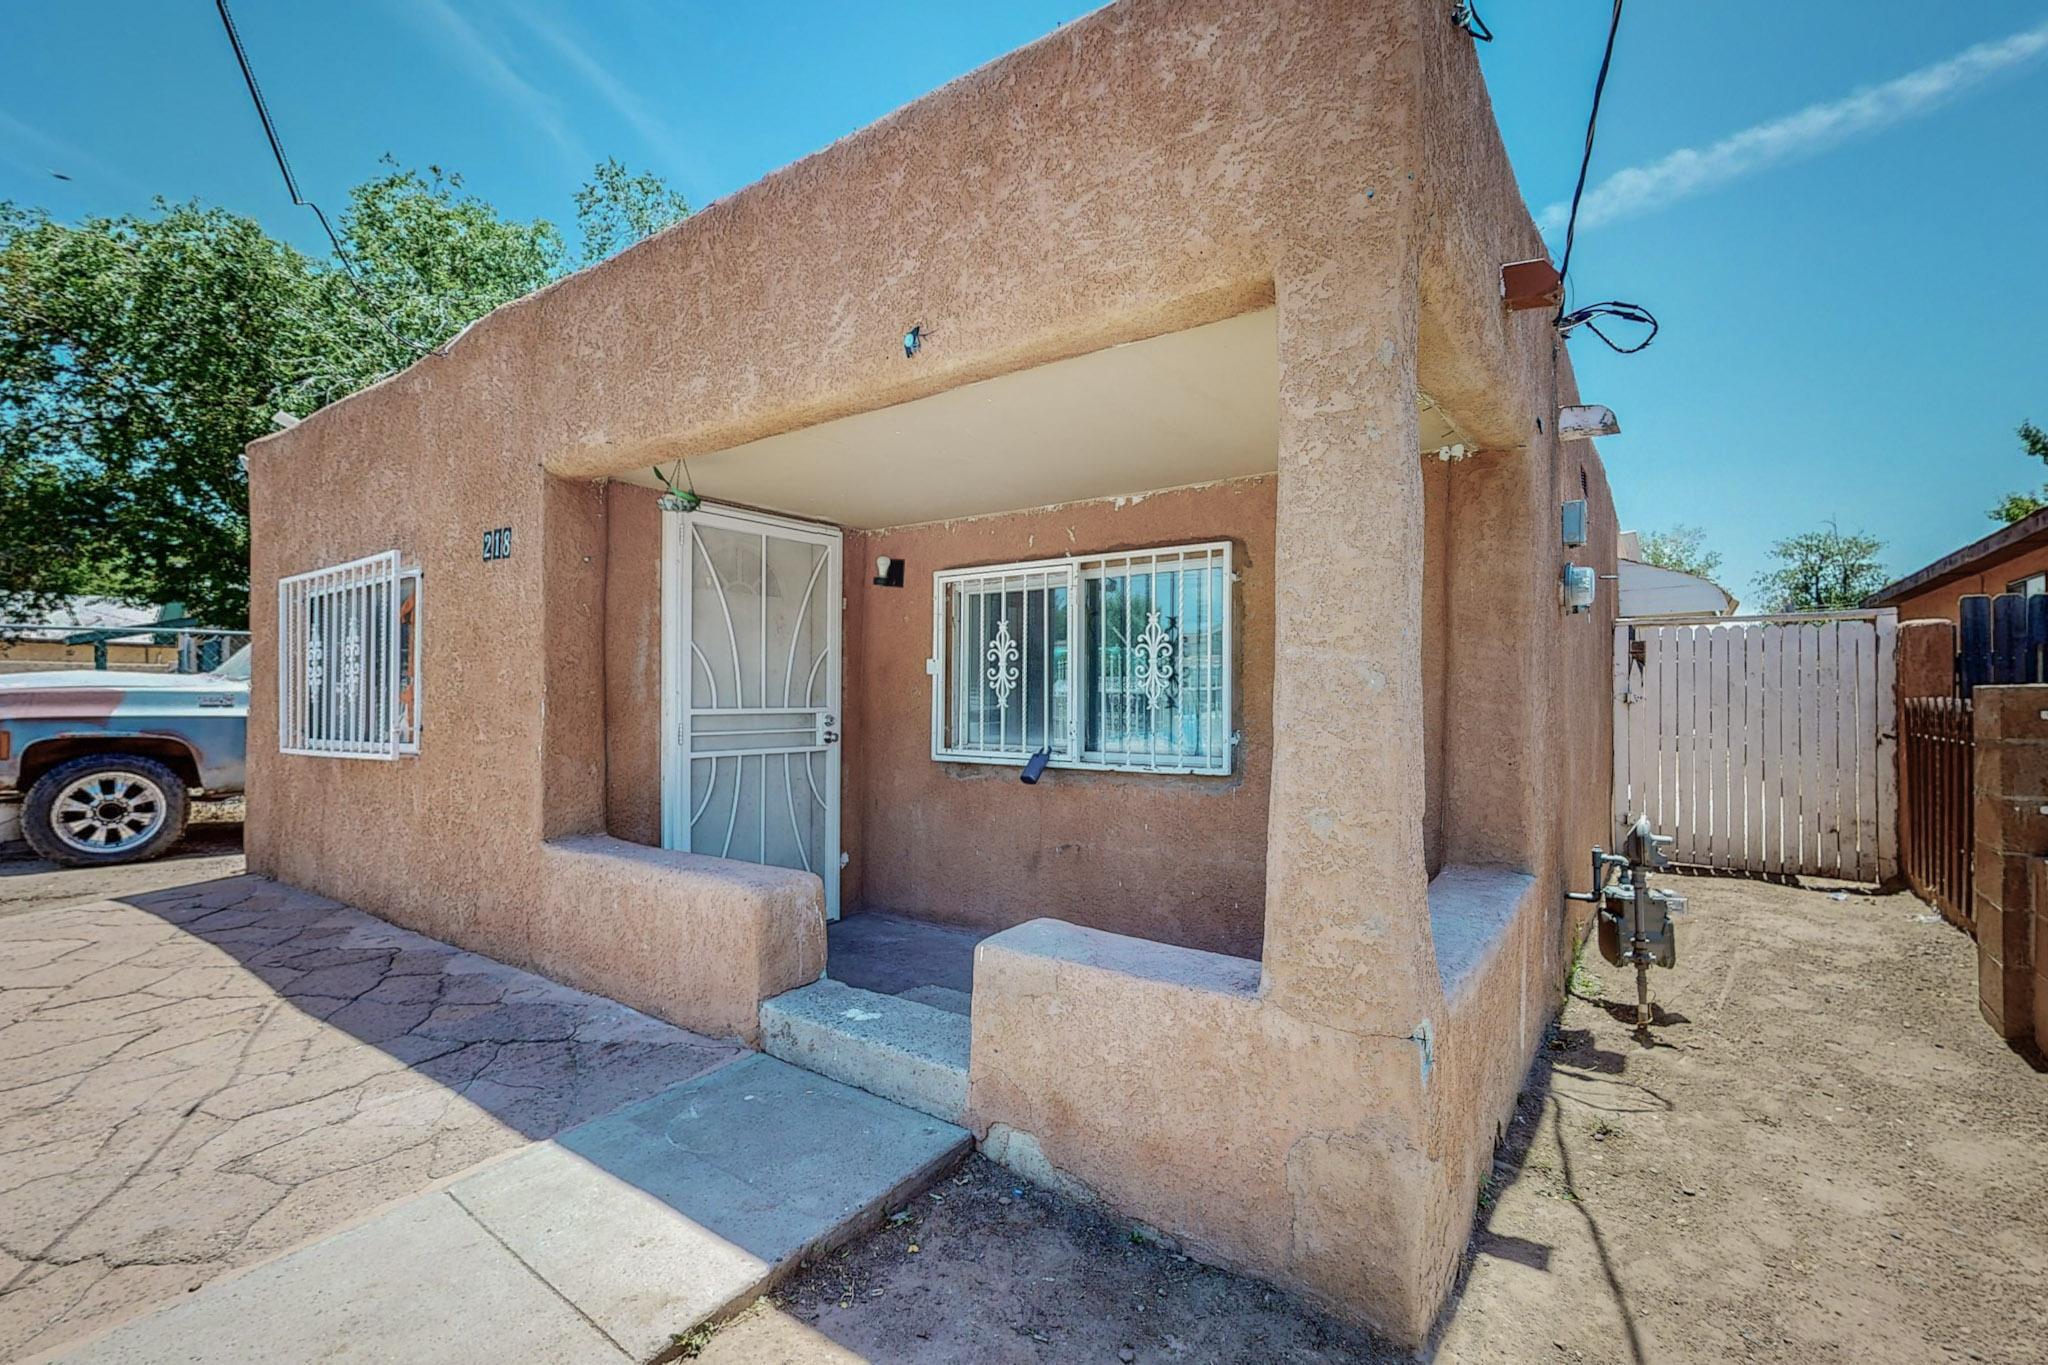 A house brimming with potential, perfect as an investment property or for a young family. Featuring three bedrooms, one full bathroom, and backyard access, this home is an opportunity not to be missed. Visit and make it yours today!